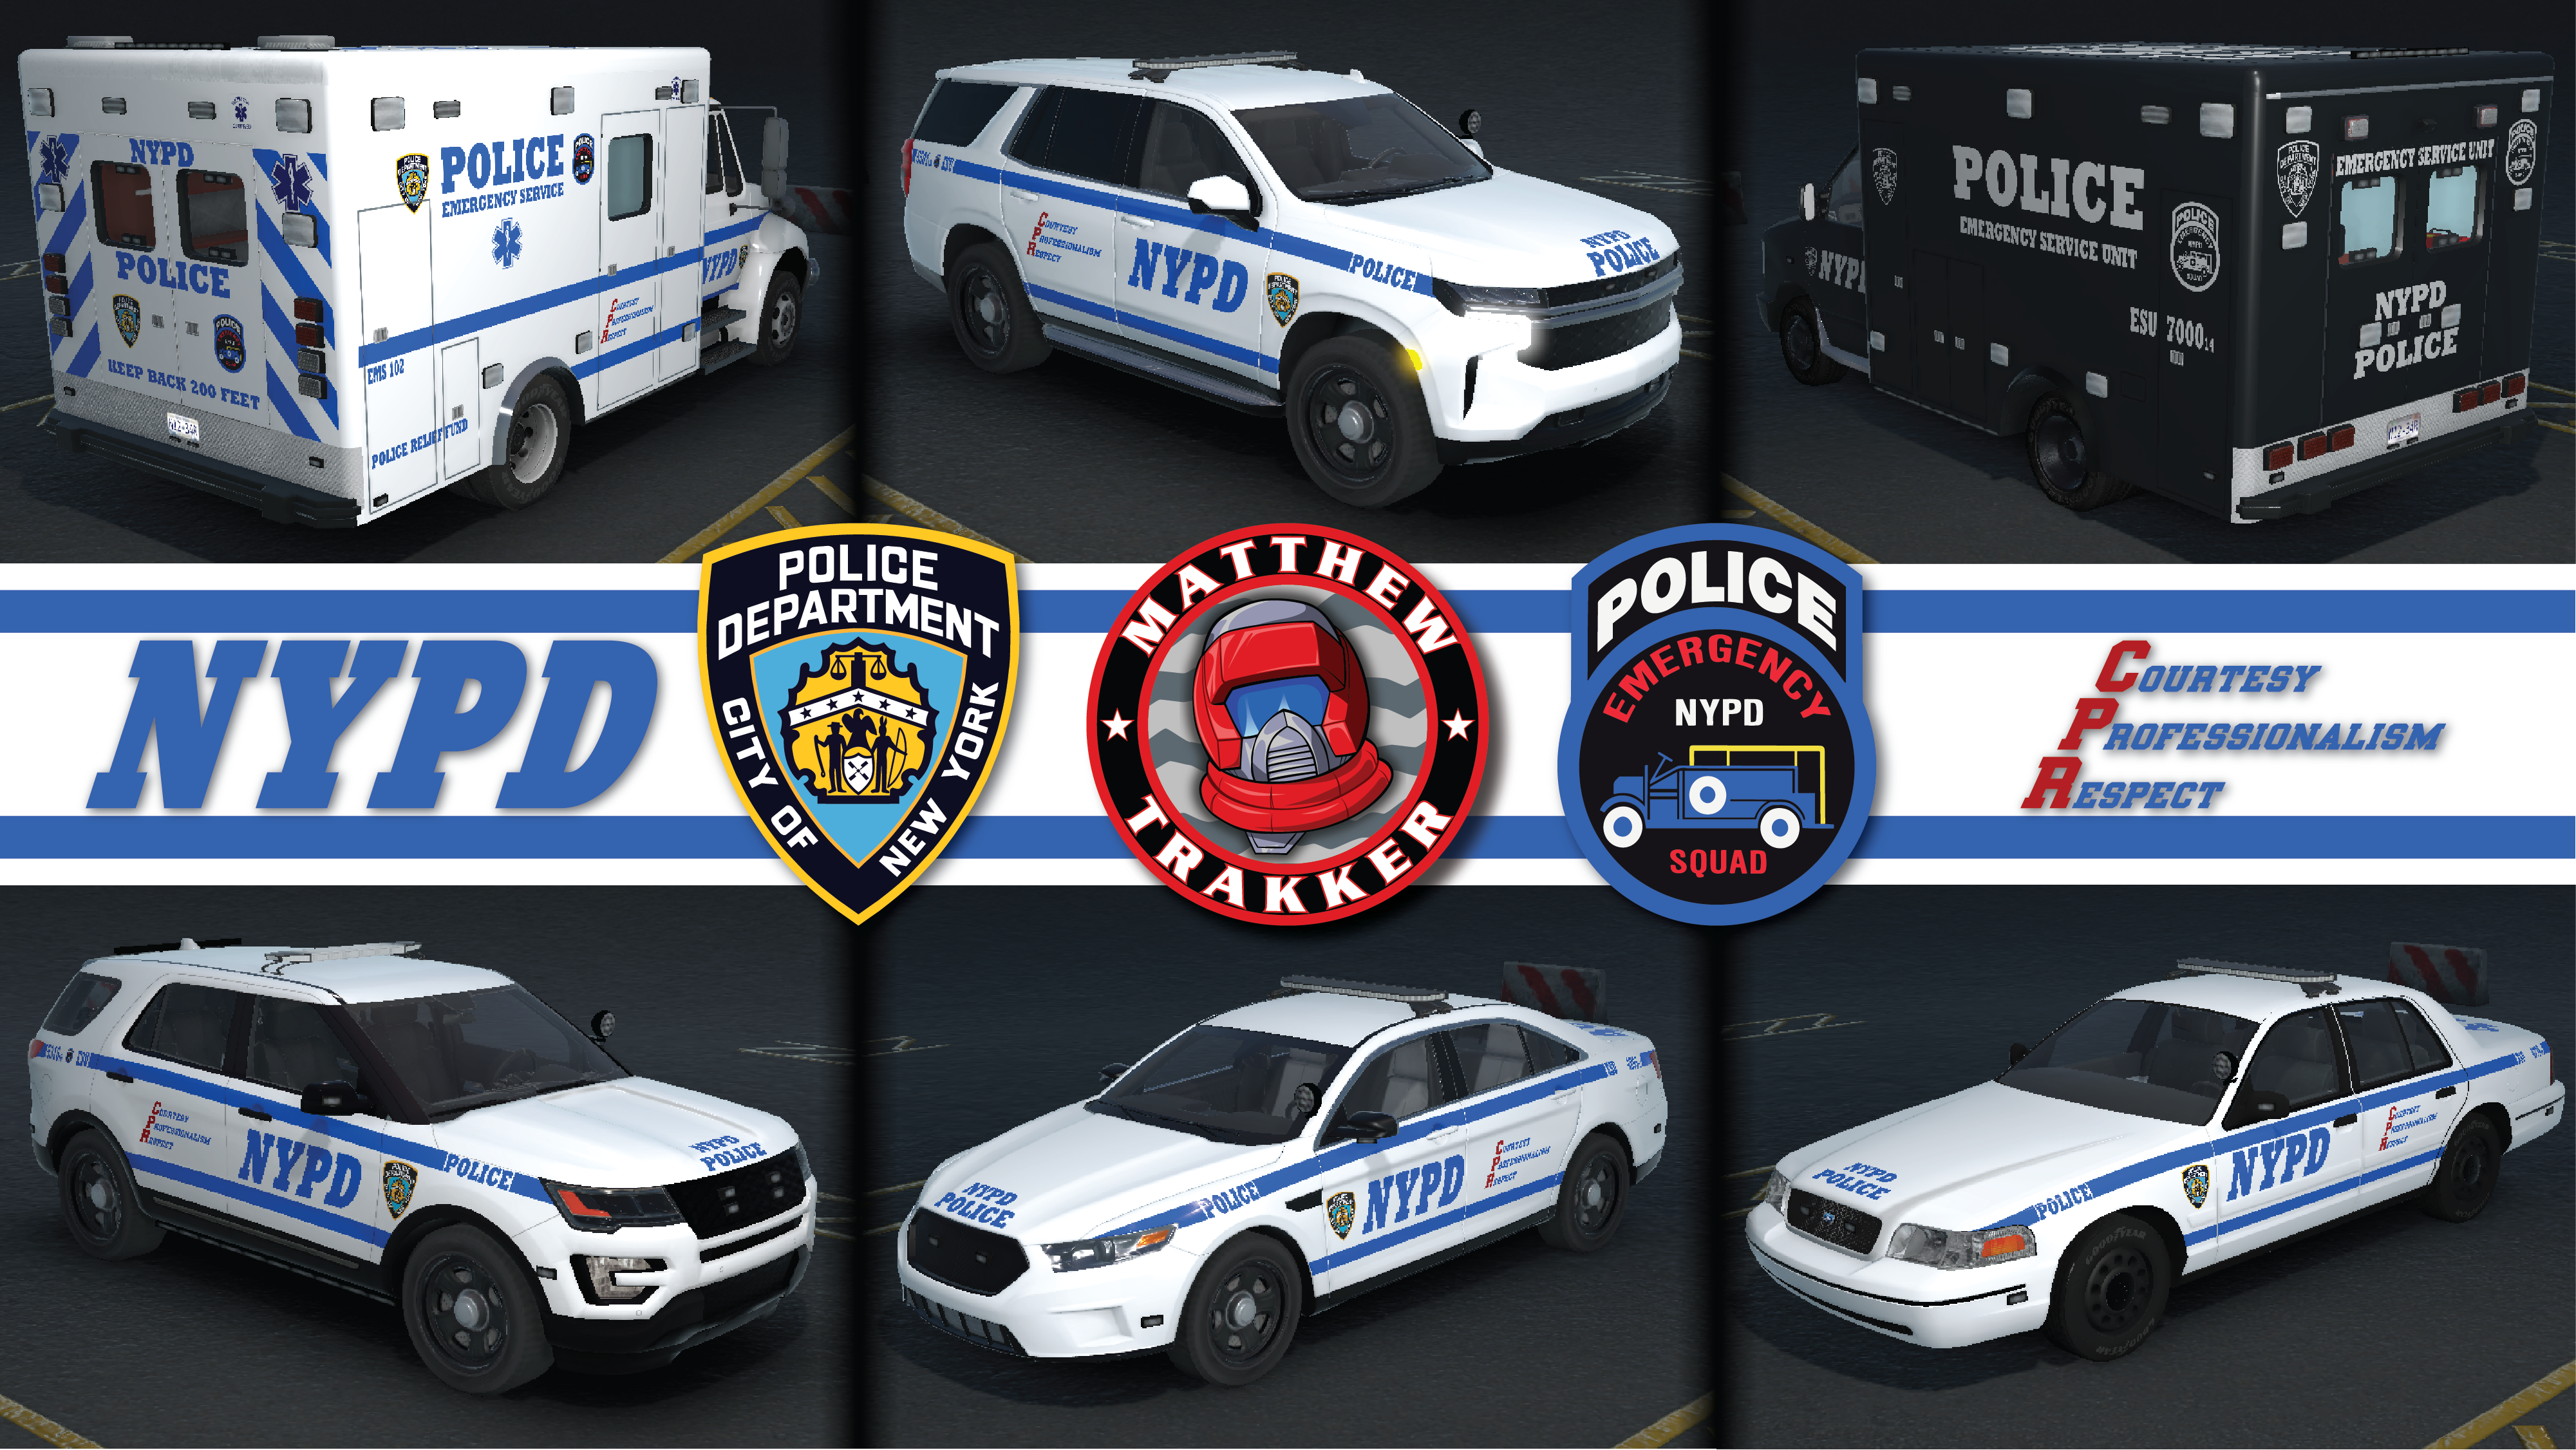 More information about "NYPD ESU Vehicles (EMS) - New York City, NY"